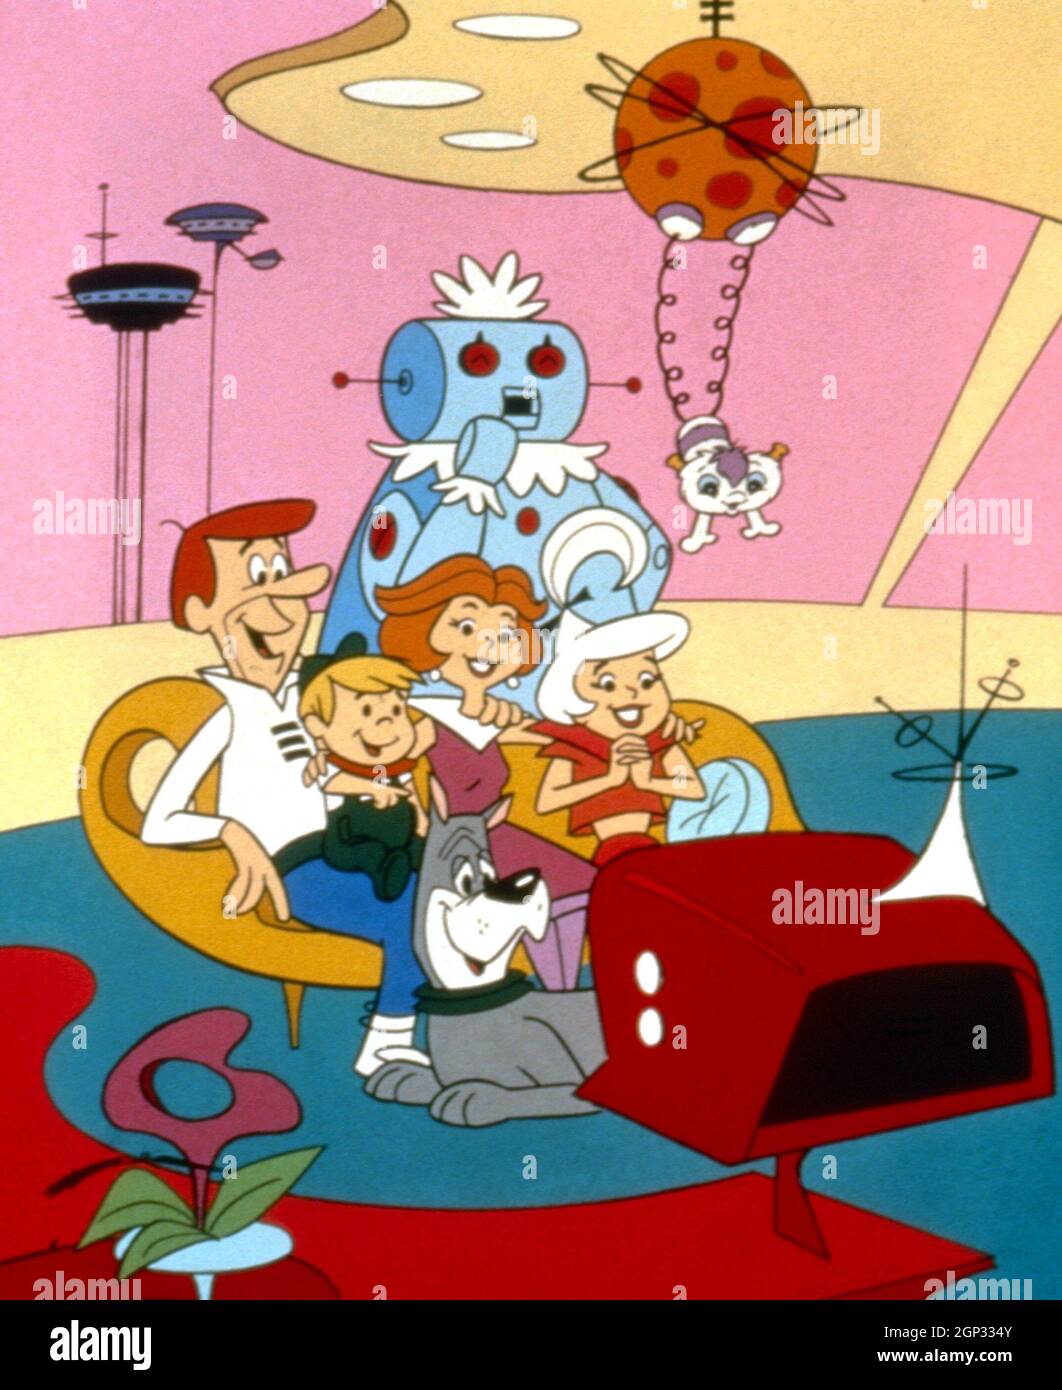 Jetsons The Movie From Left George Jetson Voiced By George O Hanlon Elro Jetson Voiced By